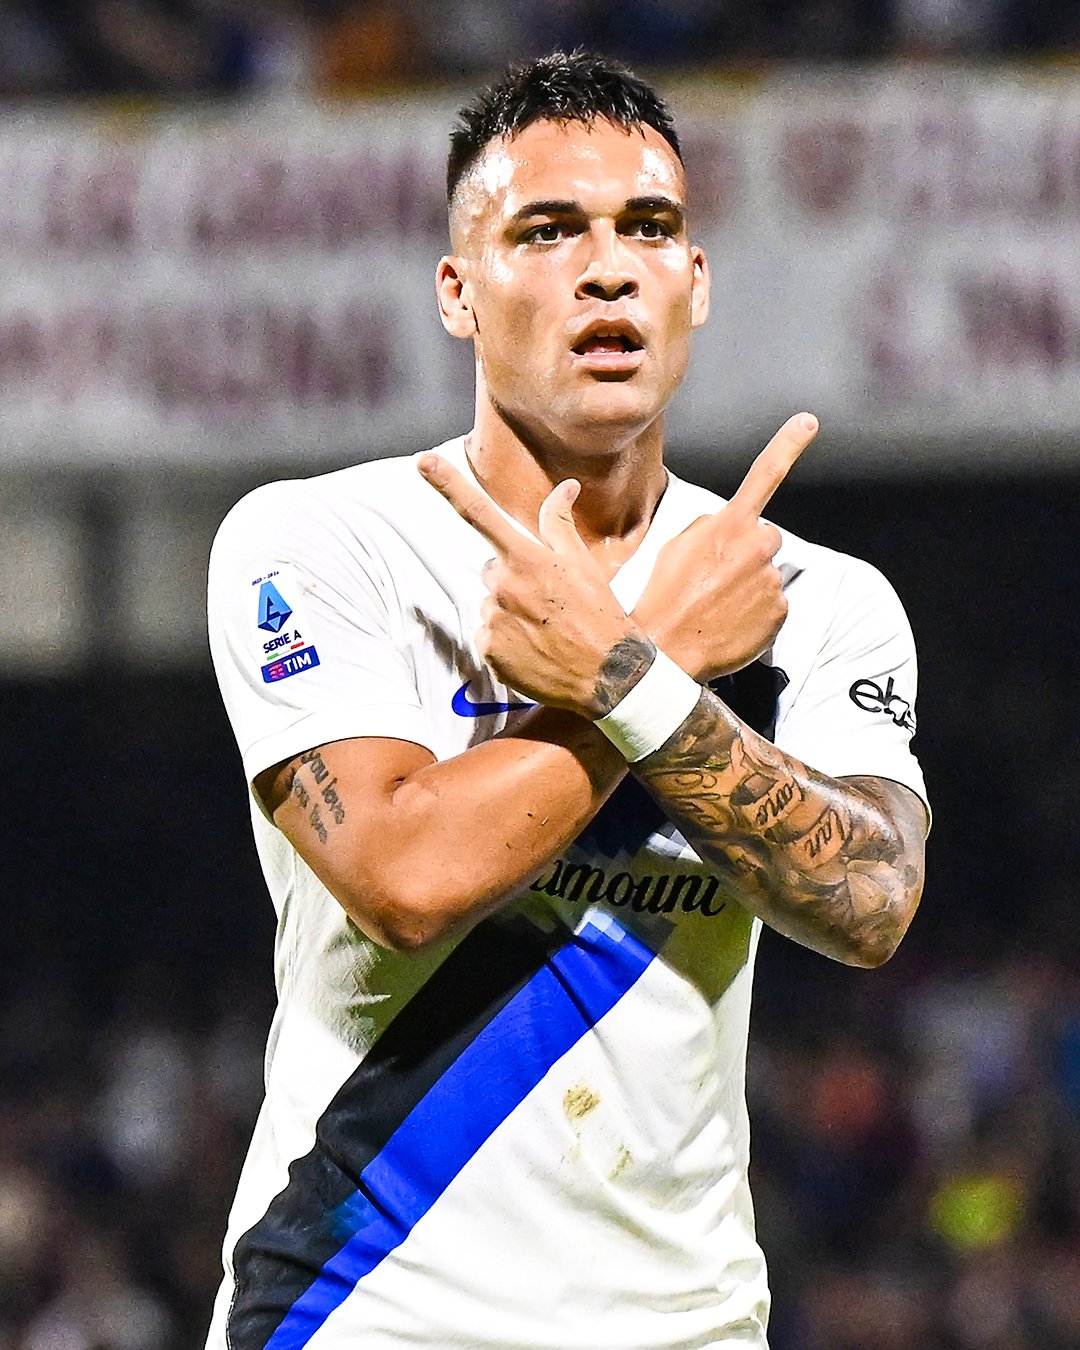 B/R Football on X: Lautaro Martínez entered Inter's game against  Salernitana in the 55th minute with it level at 0-0: 62'—⚽ (Lautaro) 77'—⚽ ( Lautaro) 85'—⚽ (Lautaro) 89'—⚽ (Lautaro) 🤯  / X